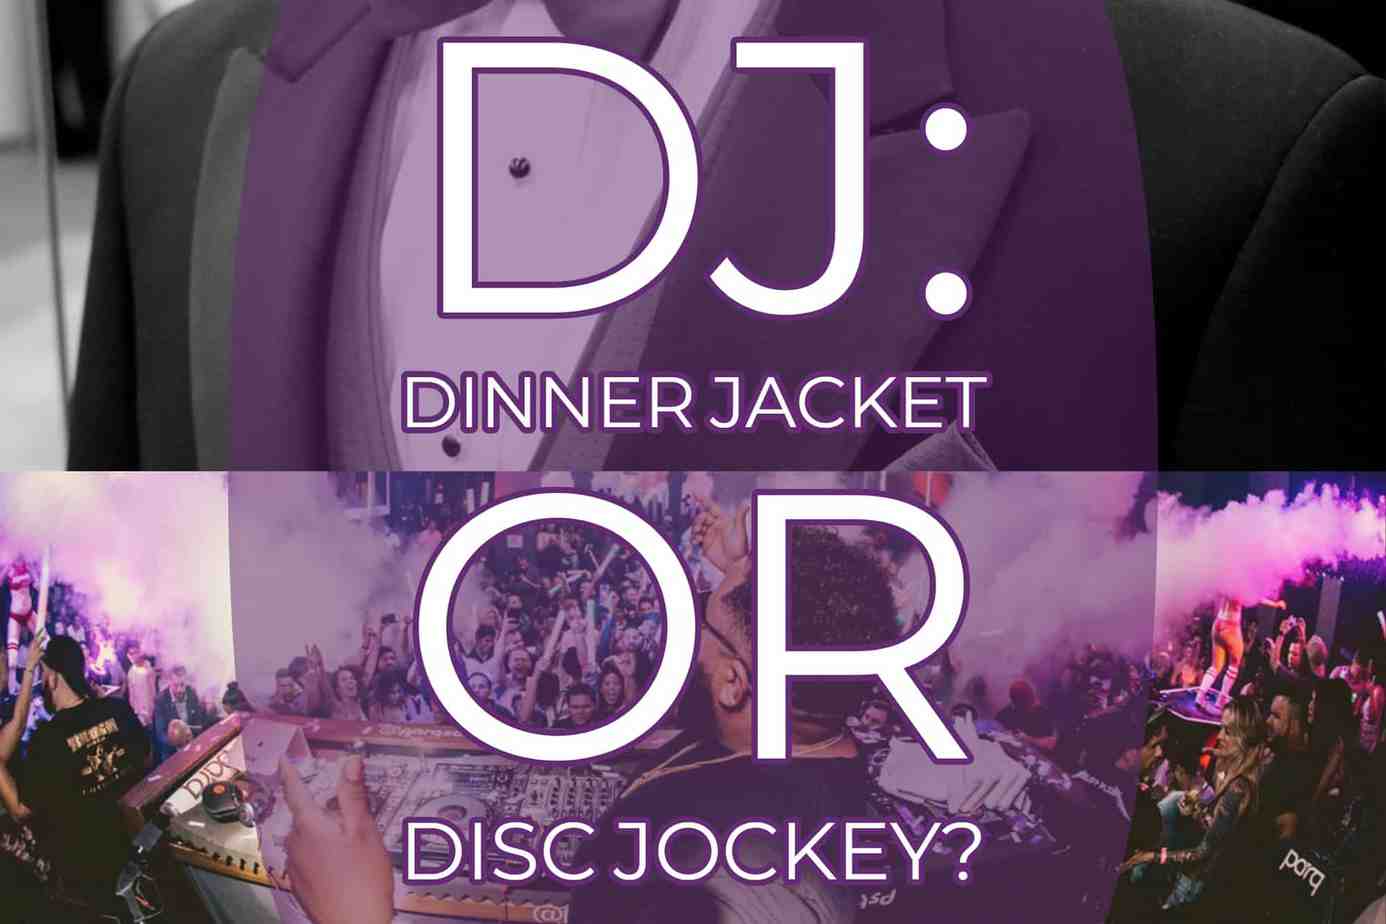 DJ - a definition of the word - disc jockey or dinner jacket